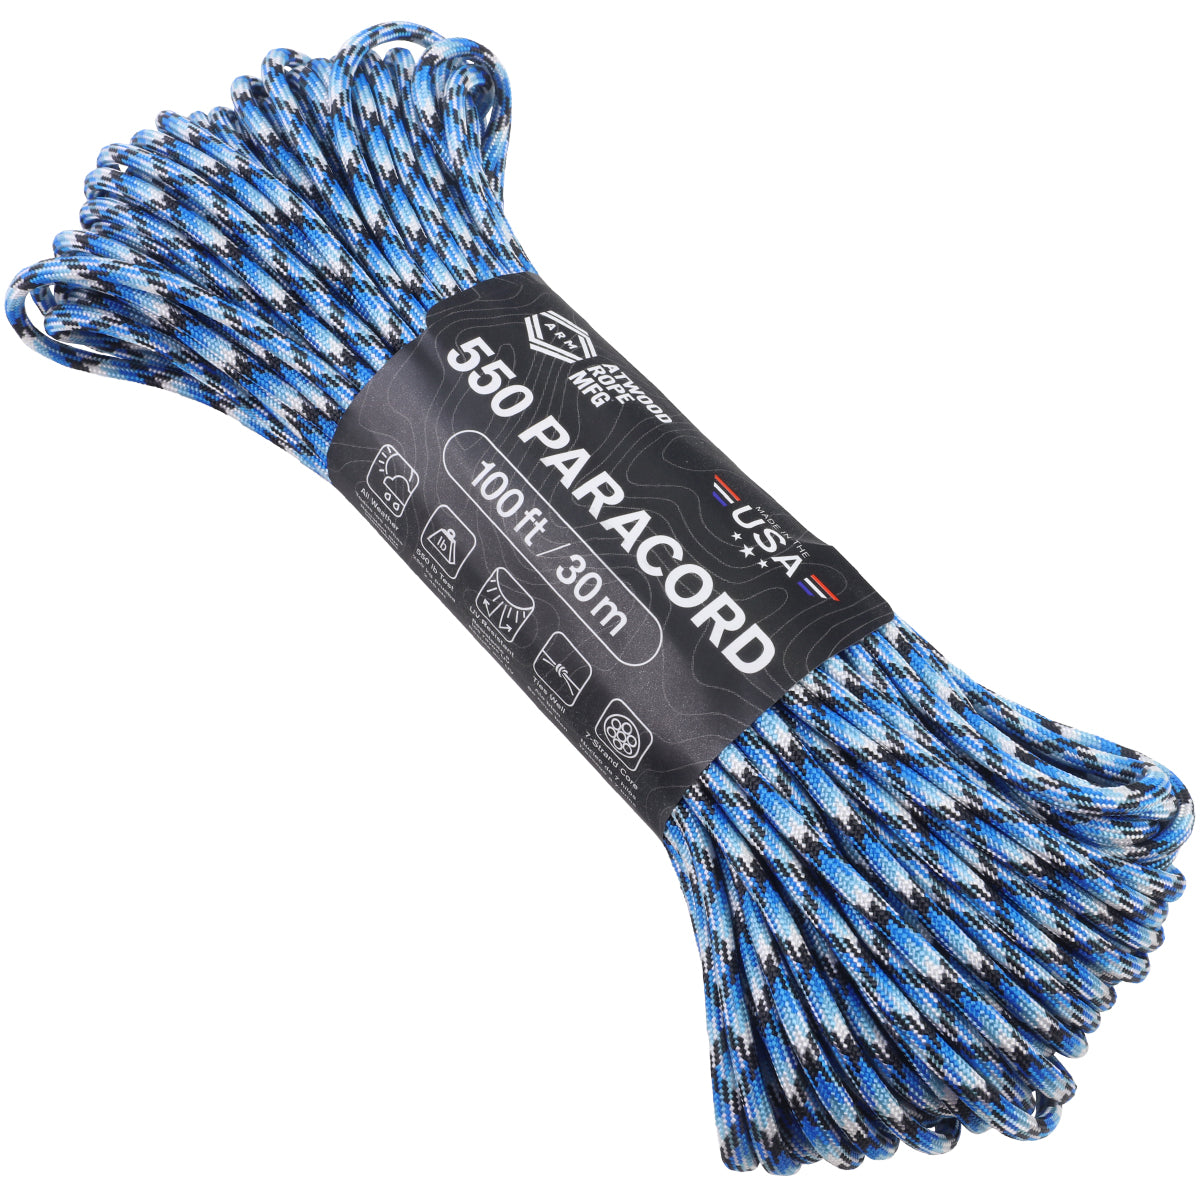 Knivesandtools 550 paracord type III, colore: blue snake, 100 ft